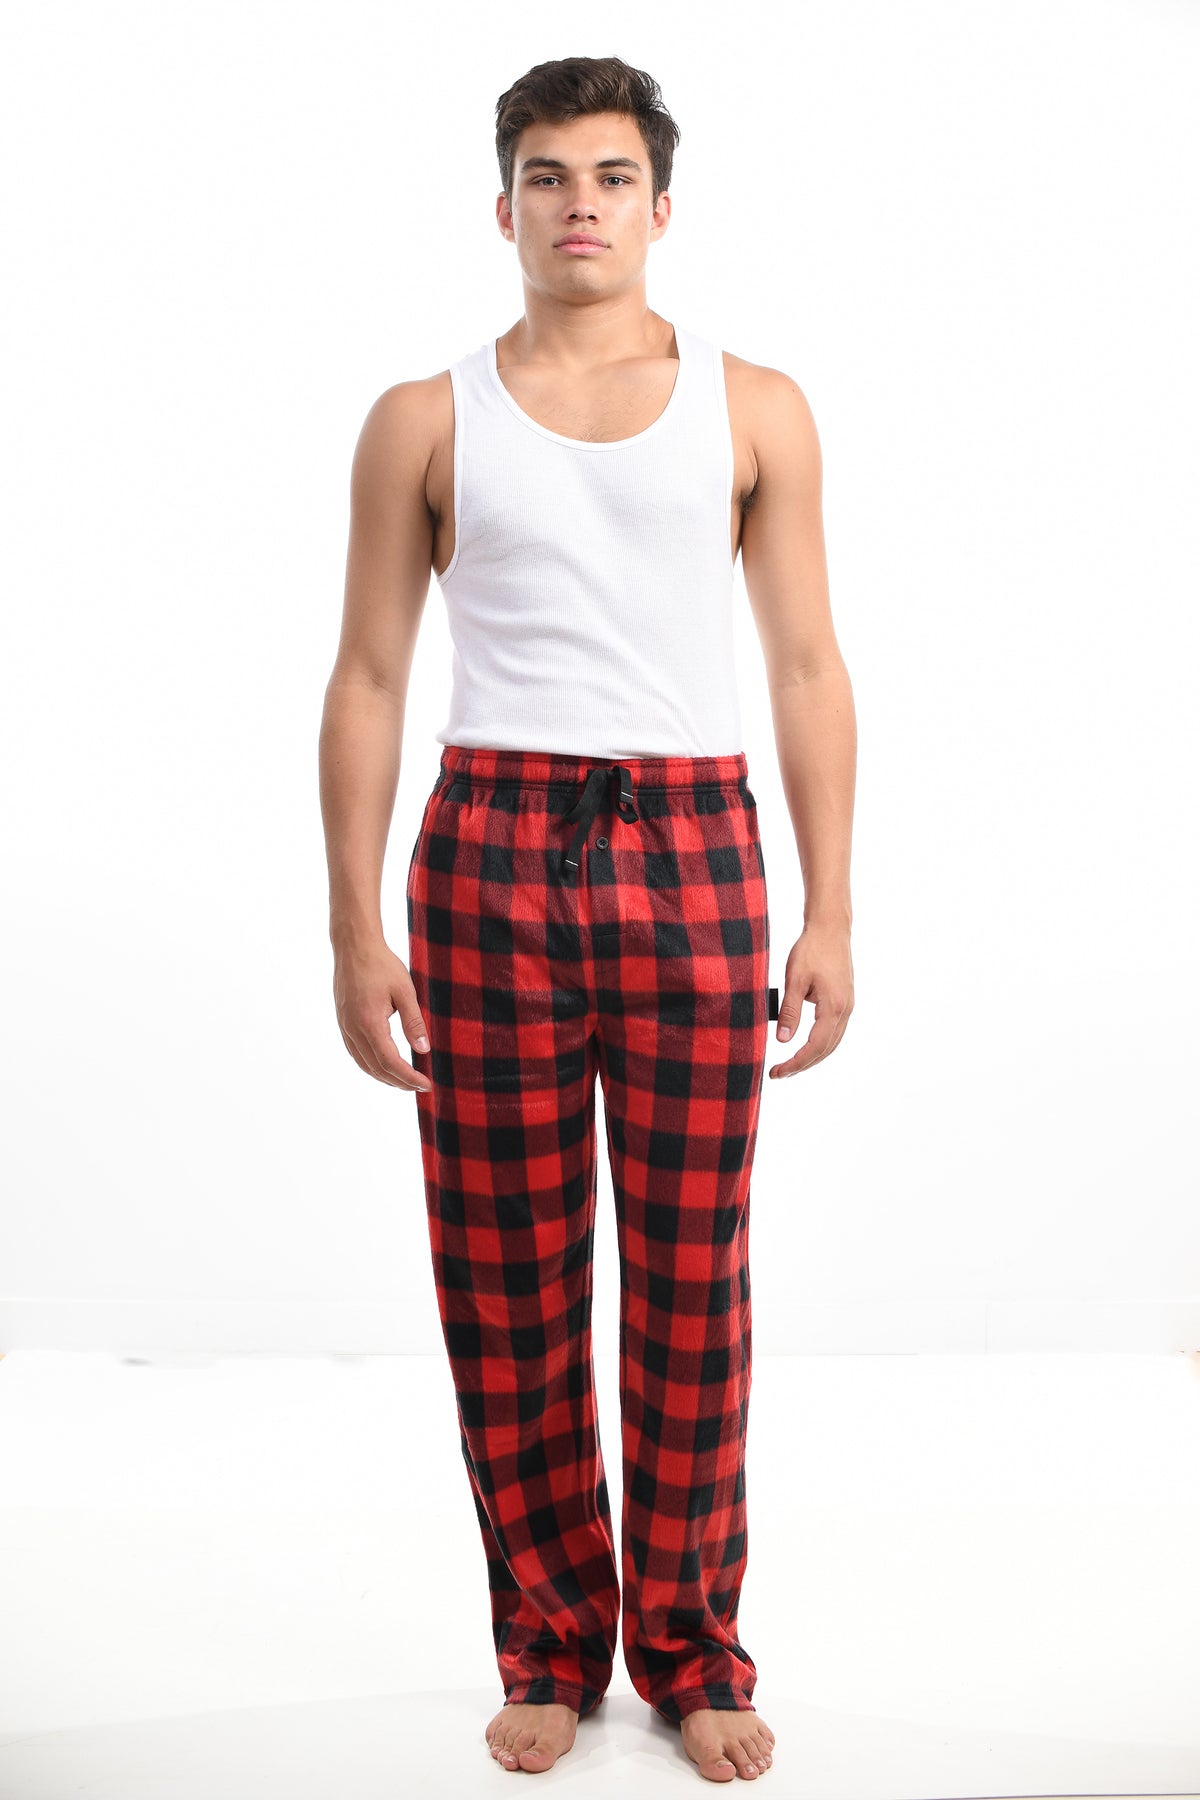 Amazon.com: Flannel Pajama Plaid Pants for Men, Comfortable Loose Trousers  Drawstring Pajamas Bottoms Sleep Lounge Wear,14 Red : Sports & Outdoors